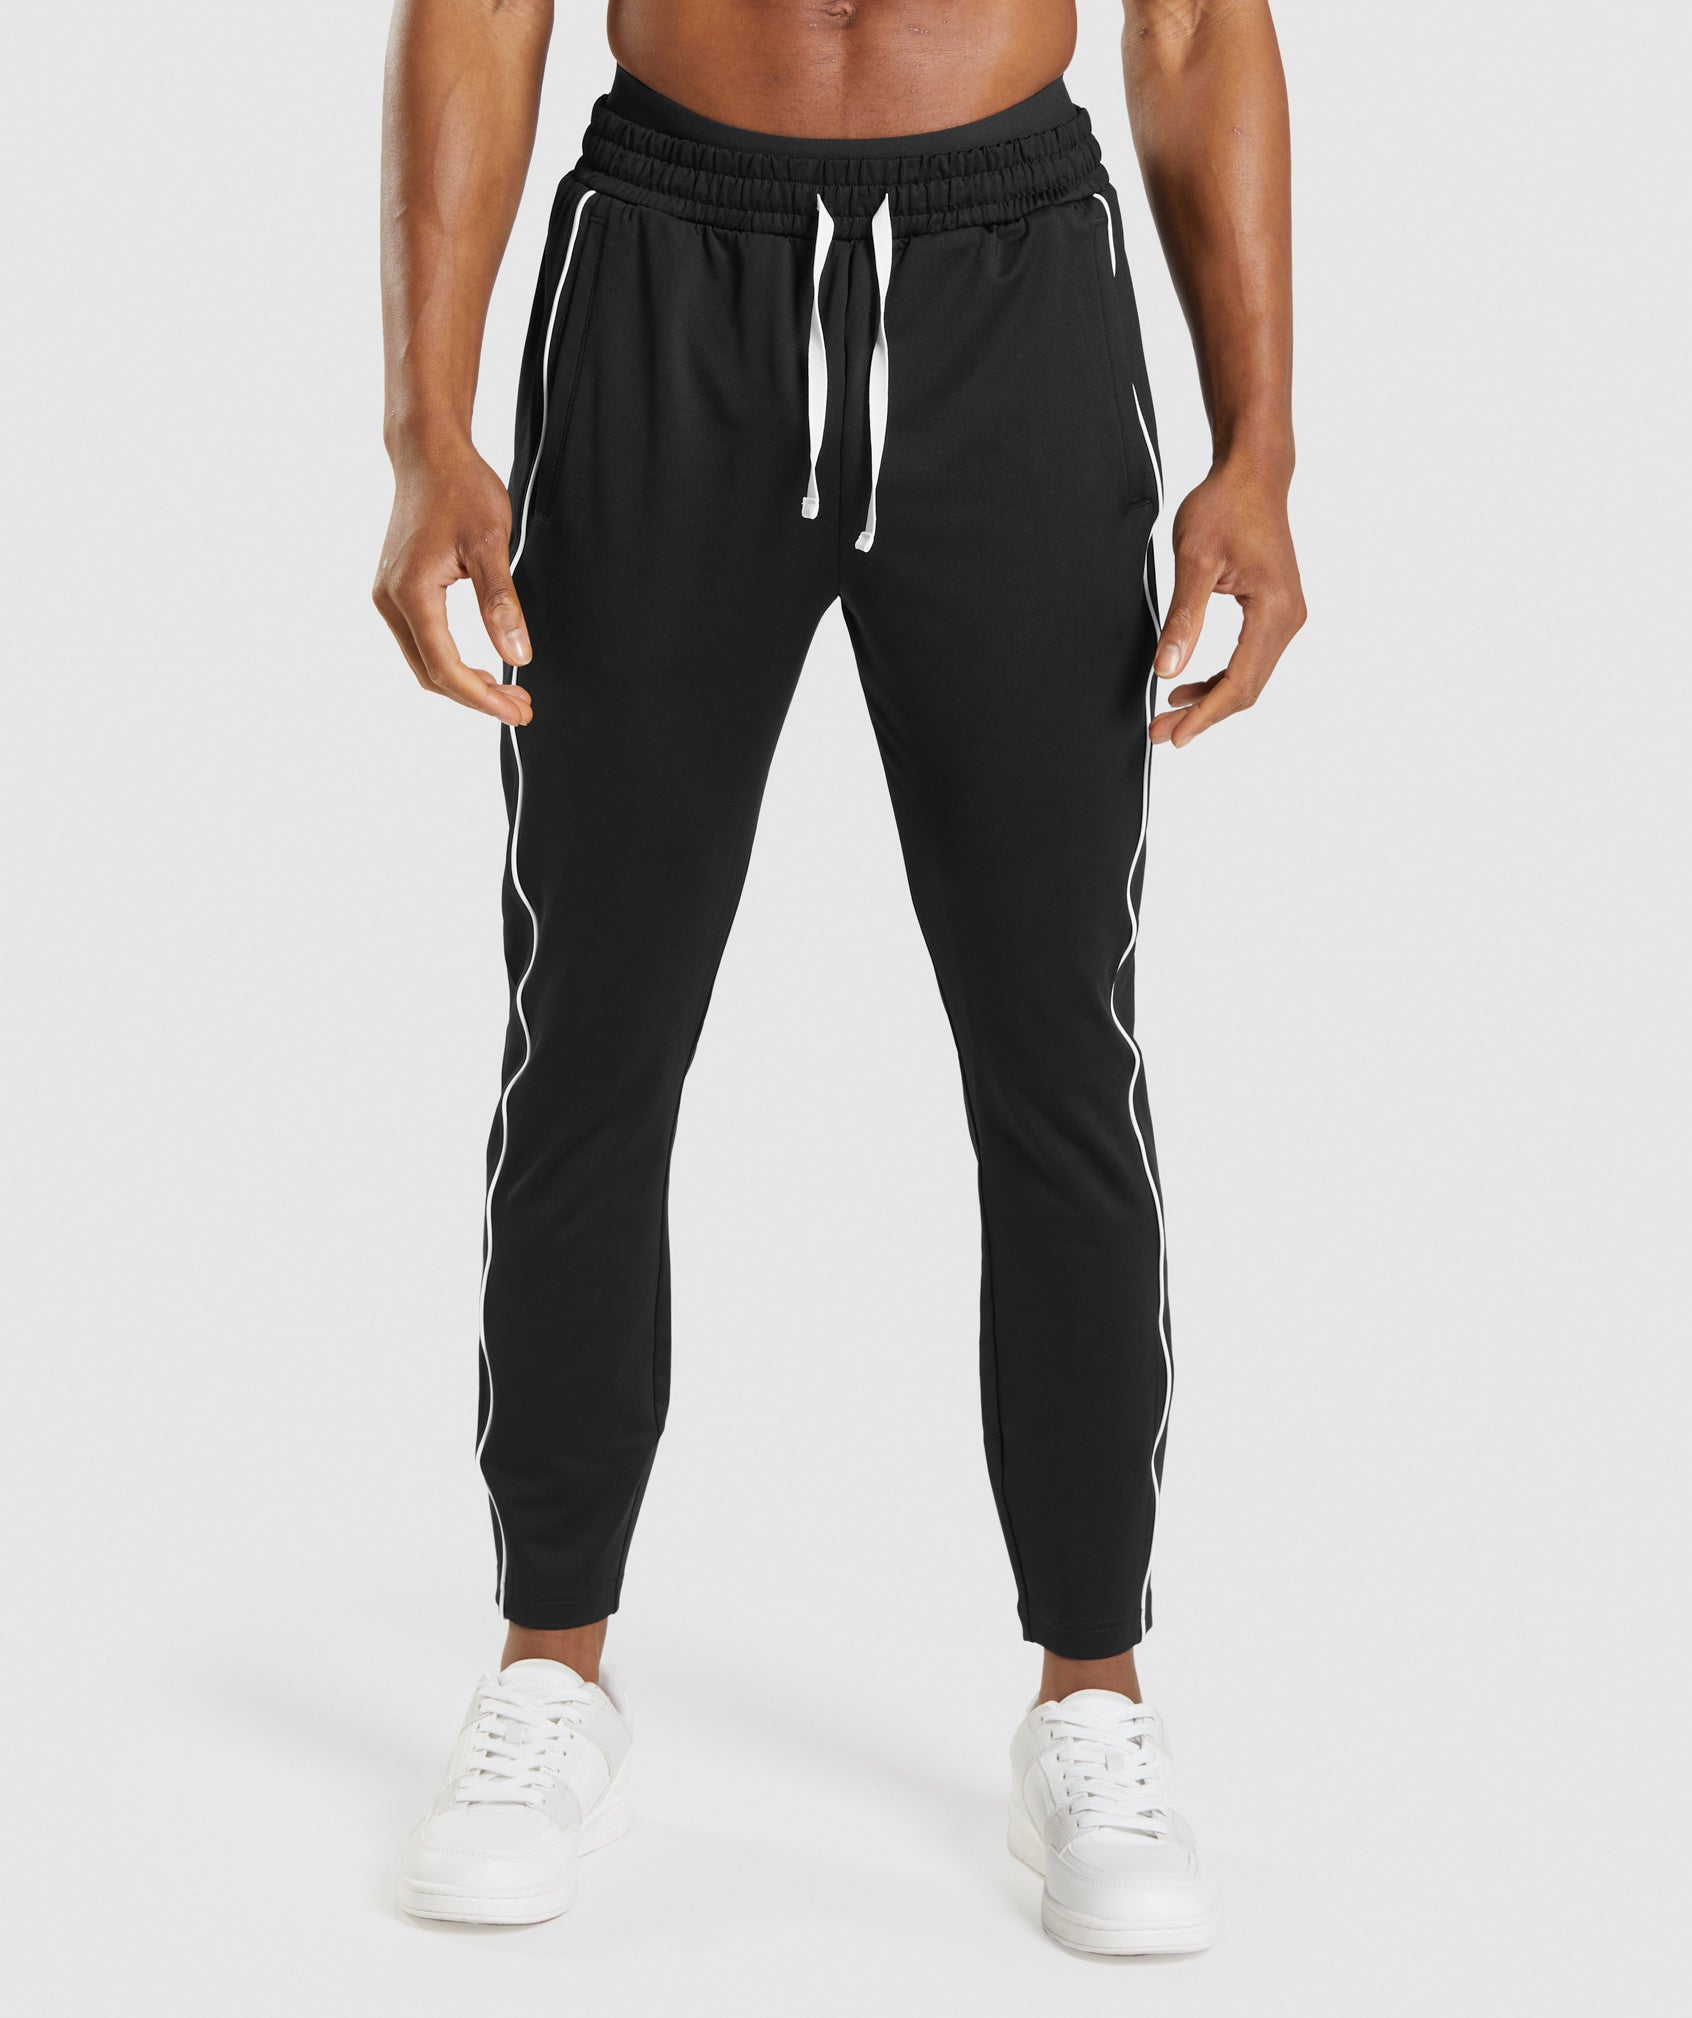 Recess Joggers in Black/White - view 1